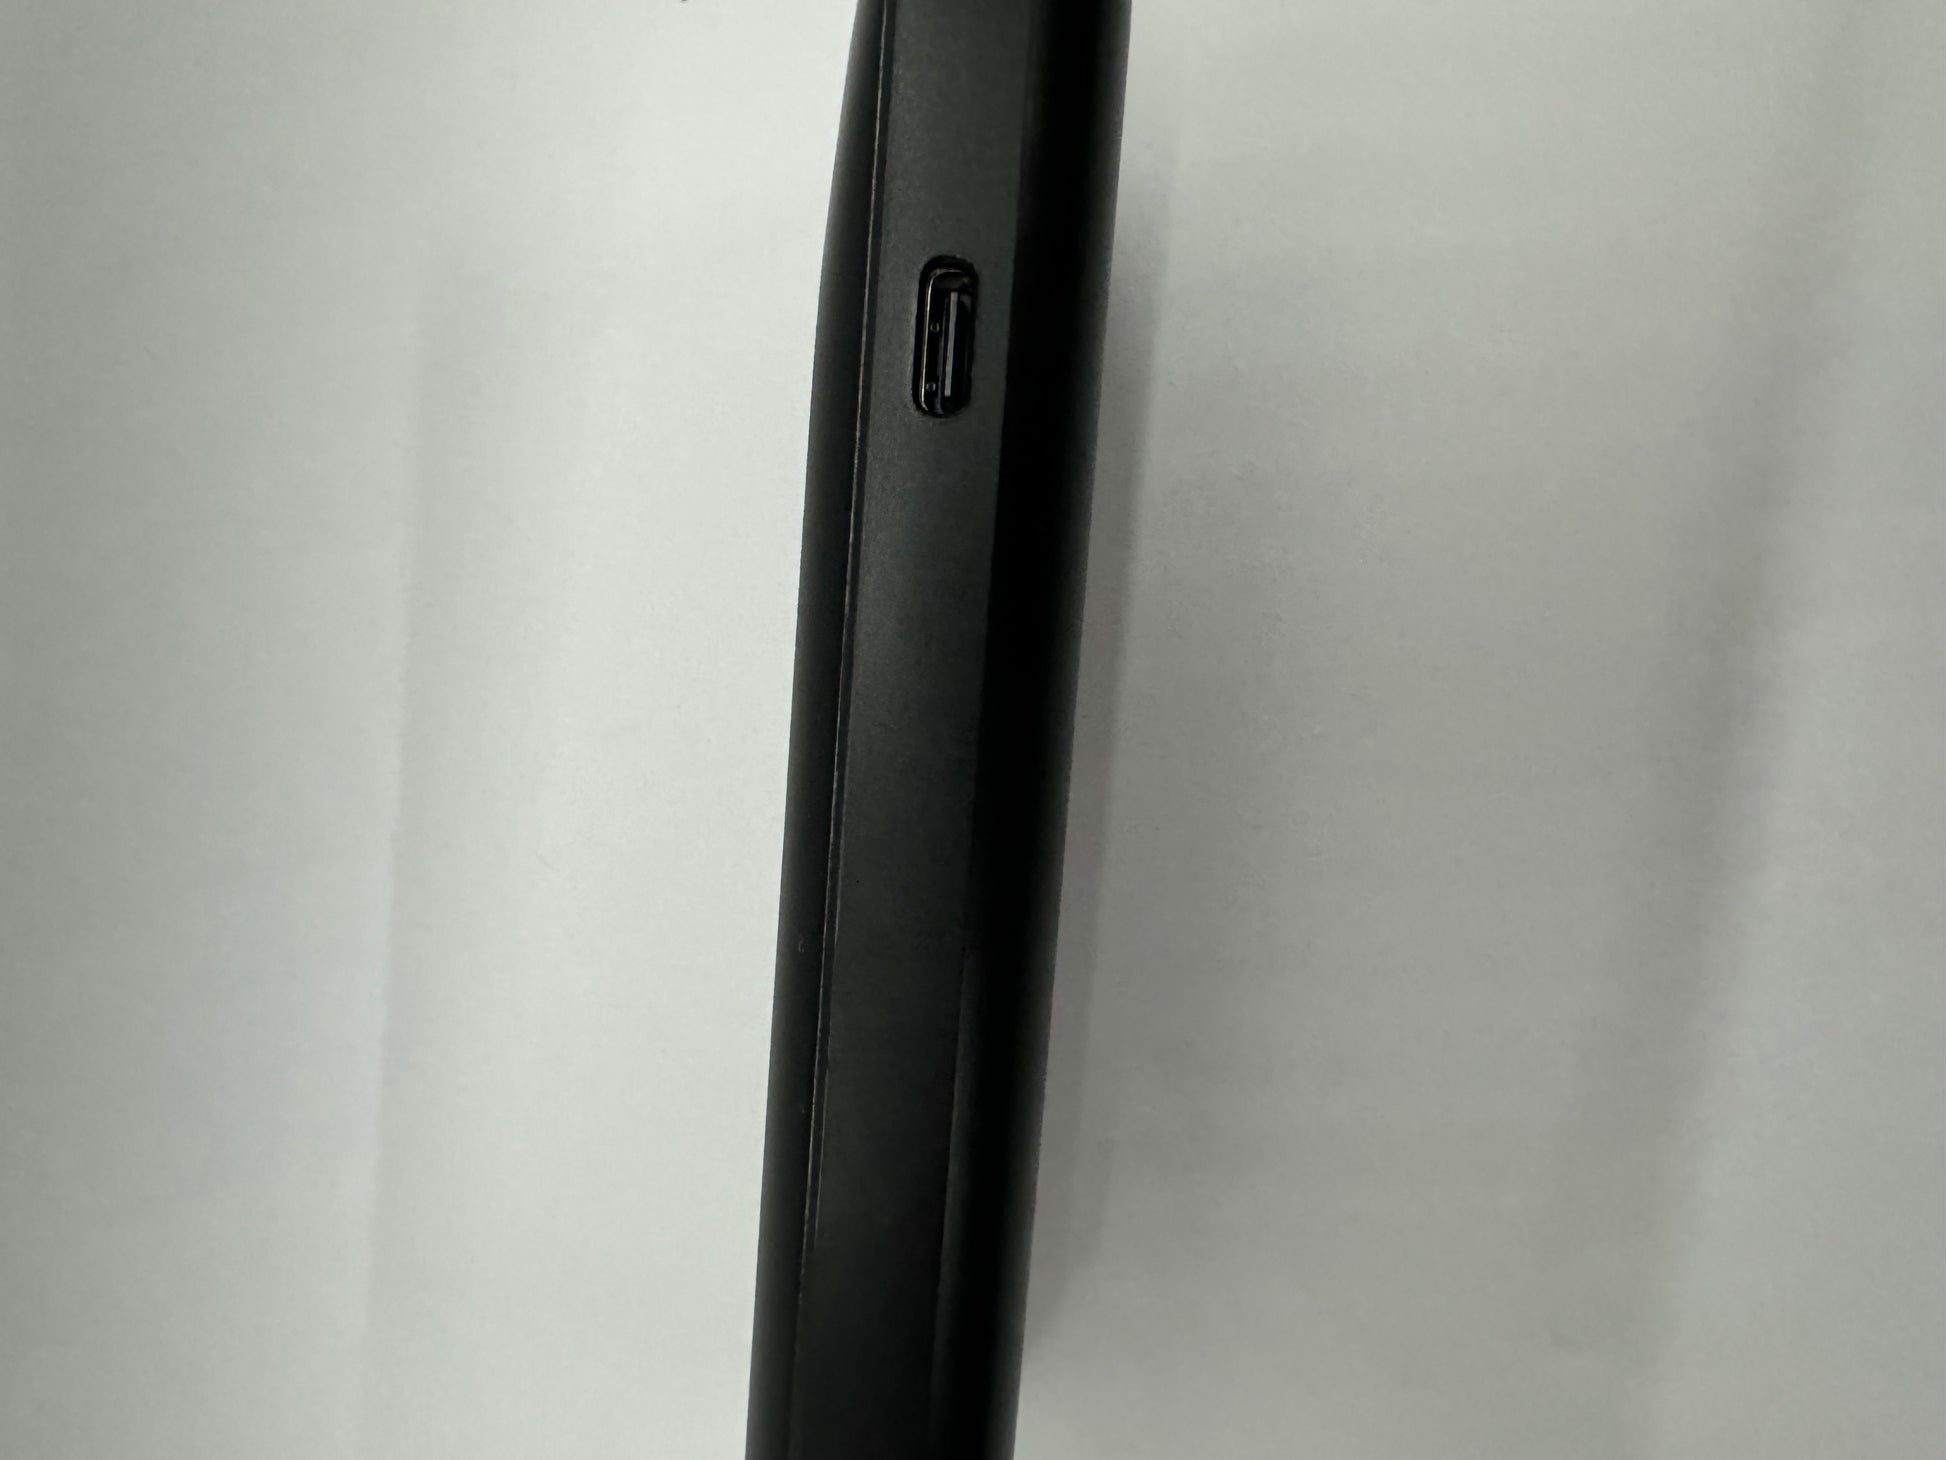 Be My AI: The picture shows a close-up of the side of a device, possibly a smartphone or tablet. The device has a black, slim edge. On this edge, there is a small port which looks like a USB port, likely used for charging or connecting to other devices. The background is plain and appears to be a light color, possibly white or light gray.